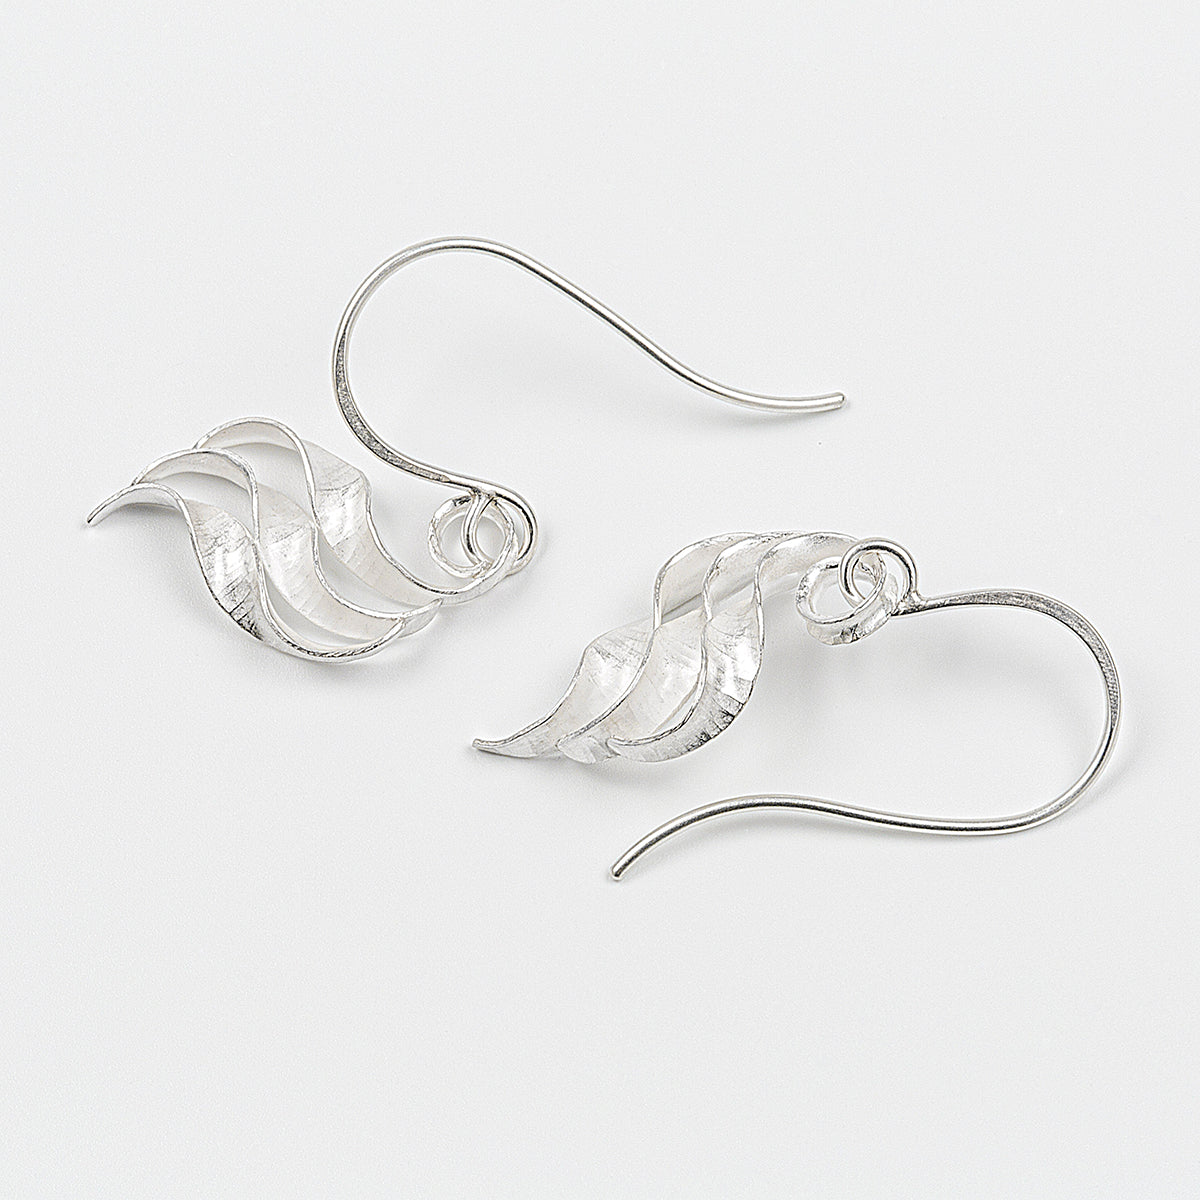 A pair of silver wing earrings made from recycled sterling silver by the process of anticlastic raising. These drop earrings have a hammered texture and non-reflective finish. Each consists of three s-shaped twisted units nested together. A different view of the smaller earrings.